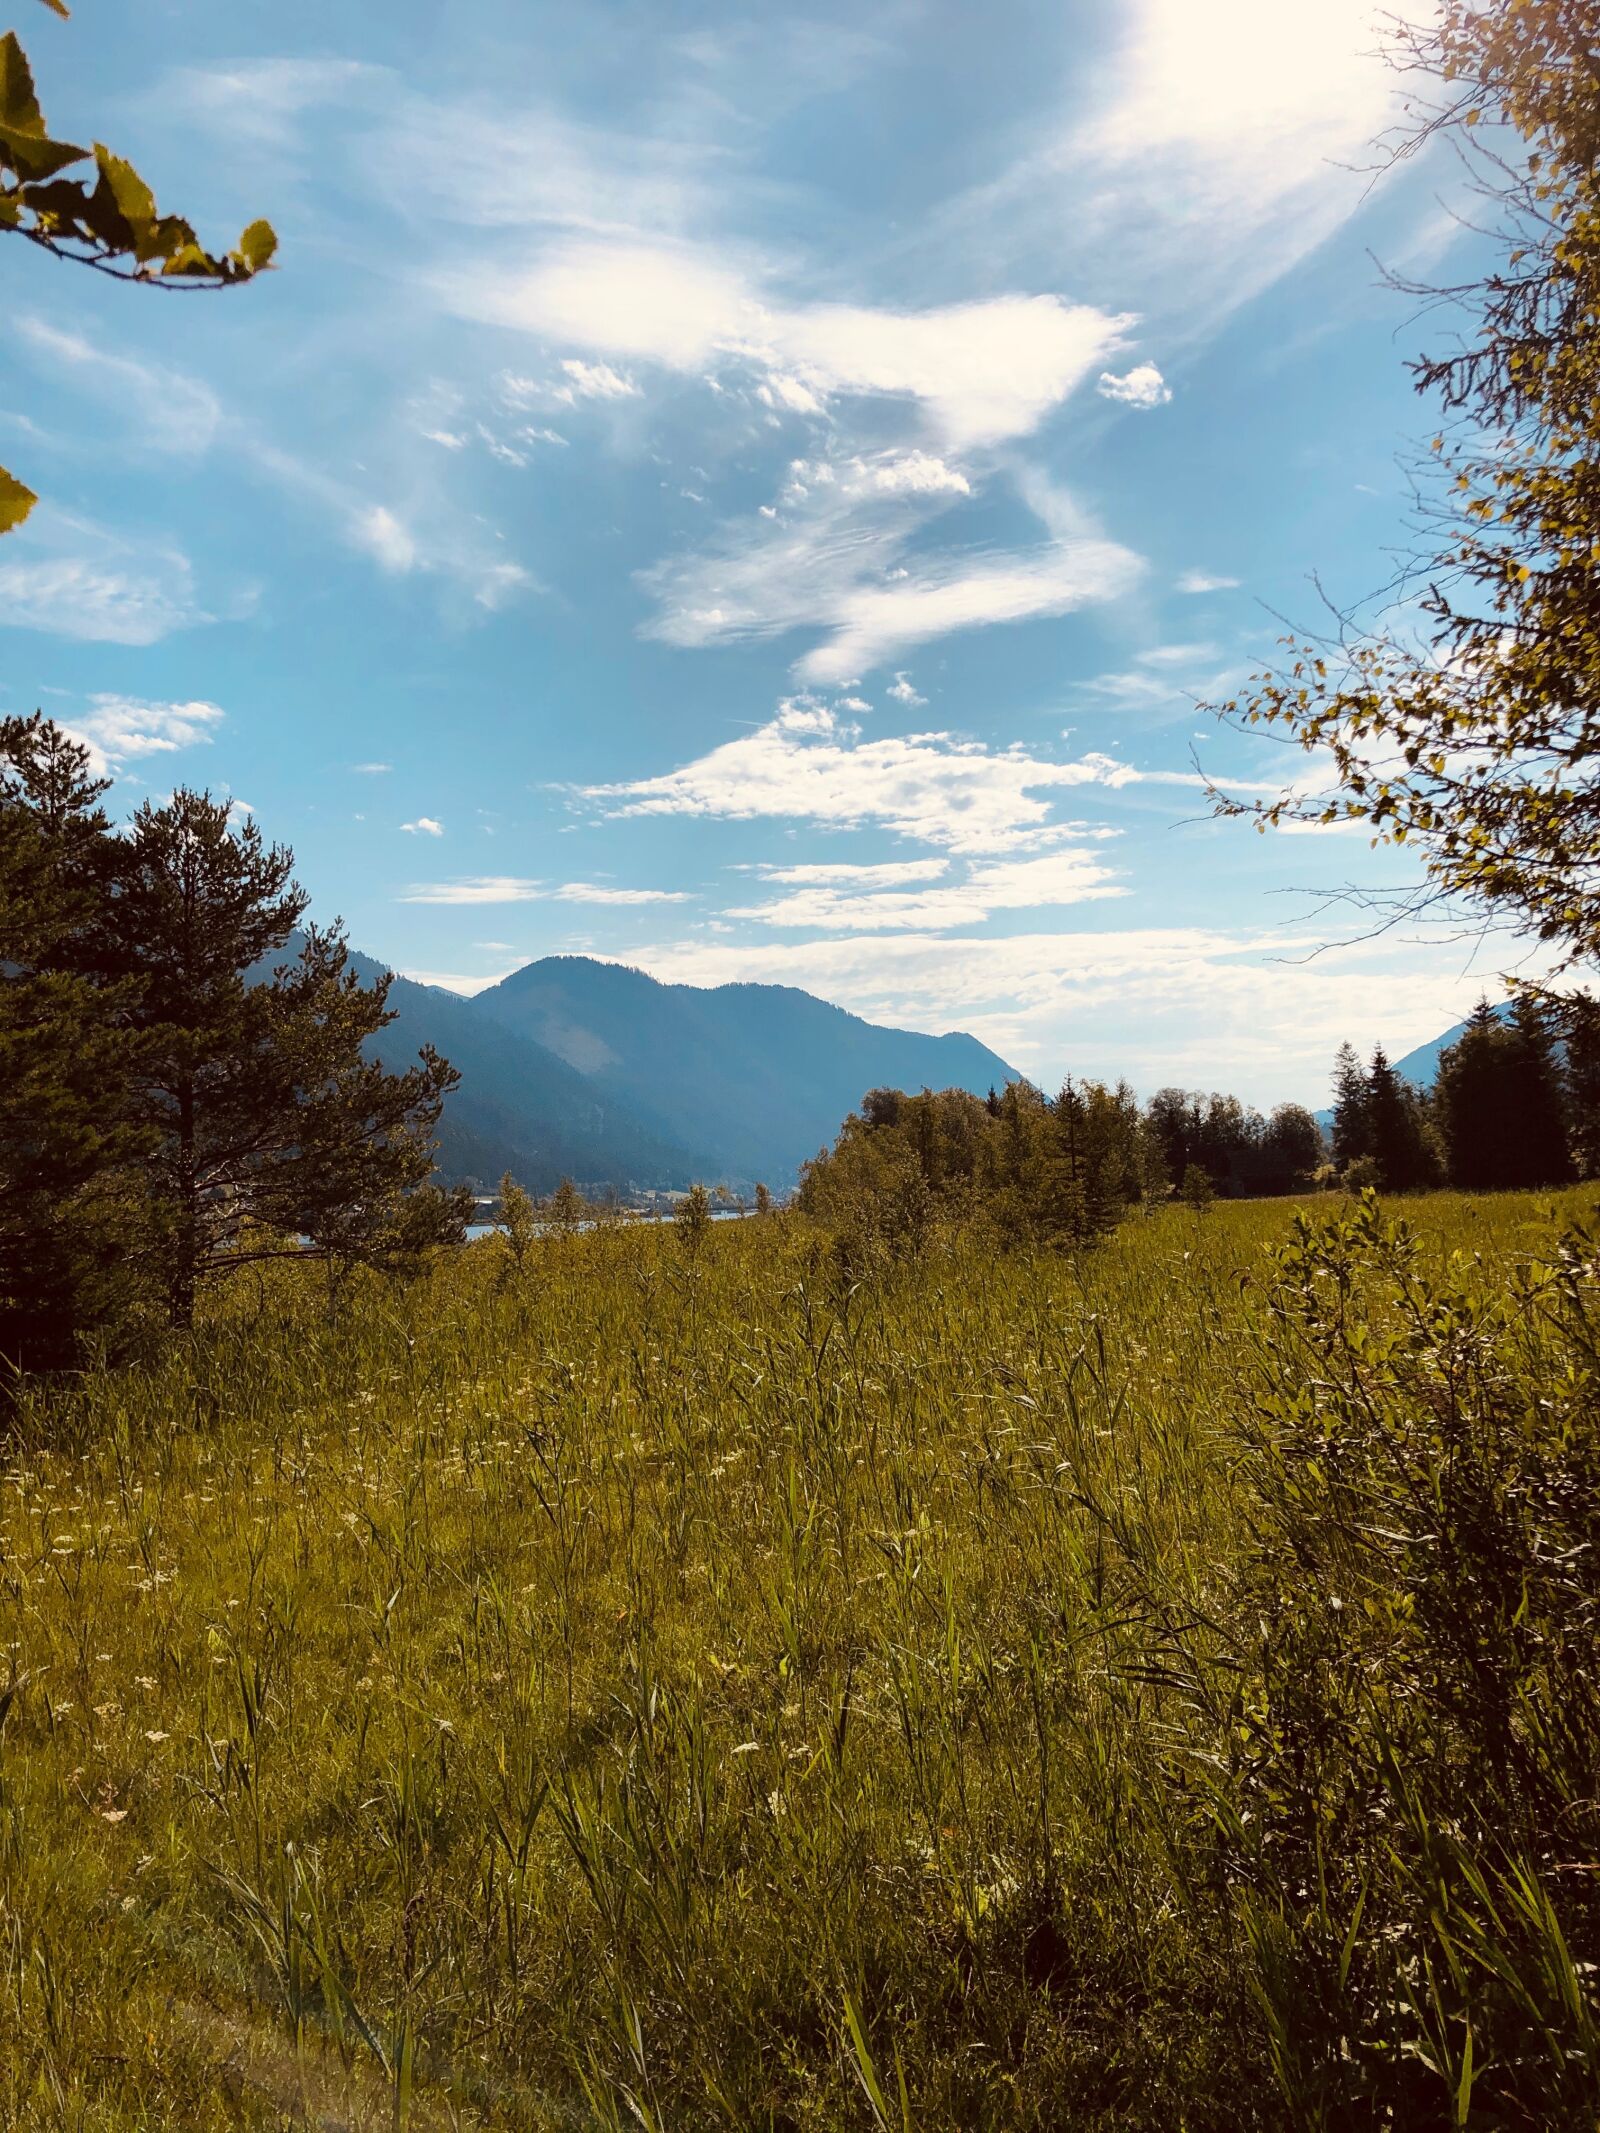 Apple iPhone X sample photo. Mountains, meadow, nature photography